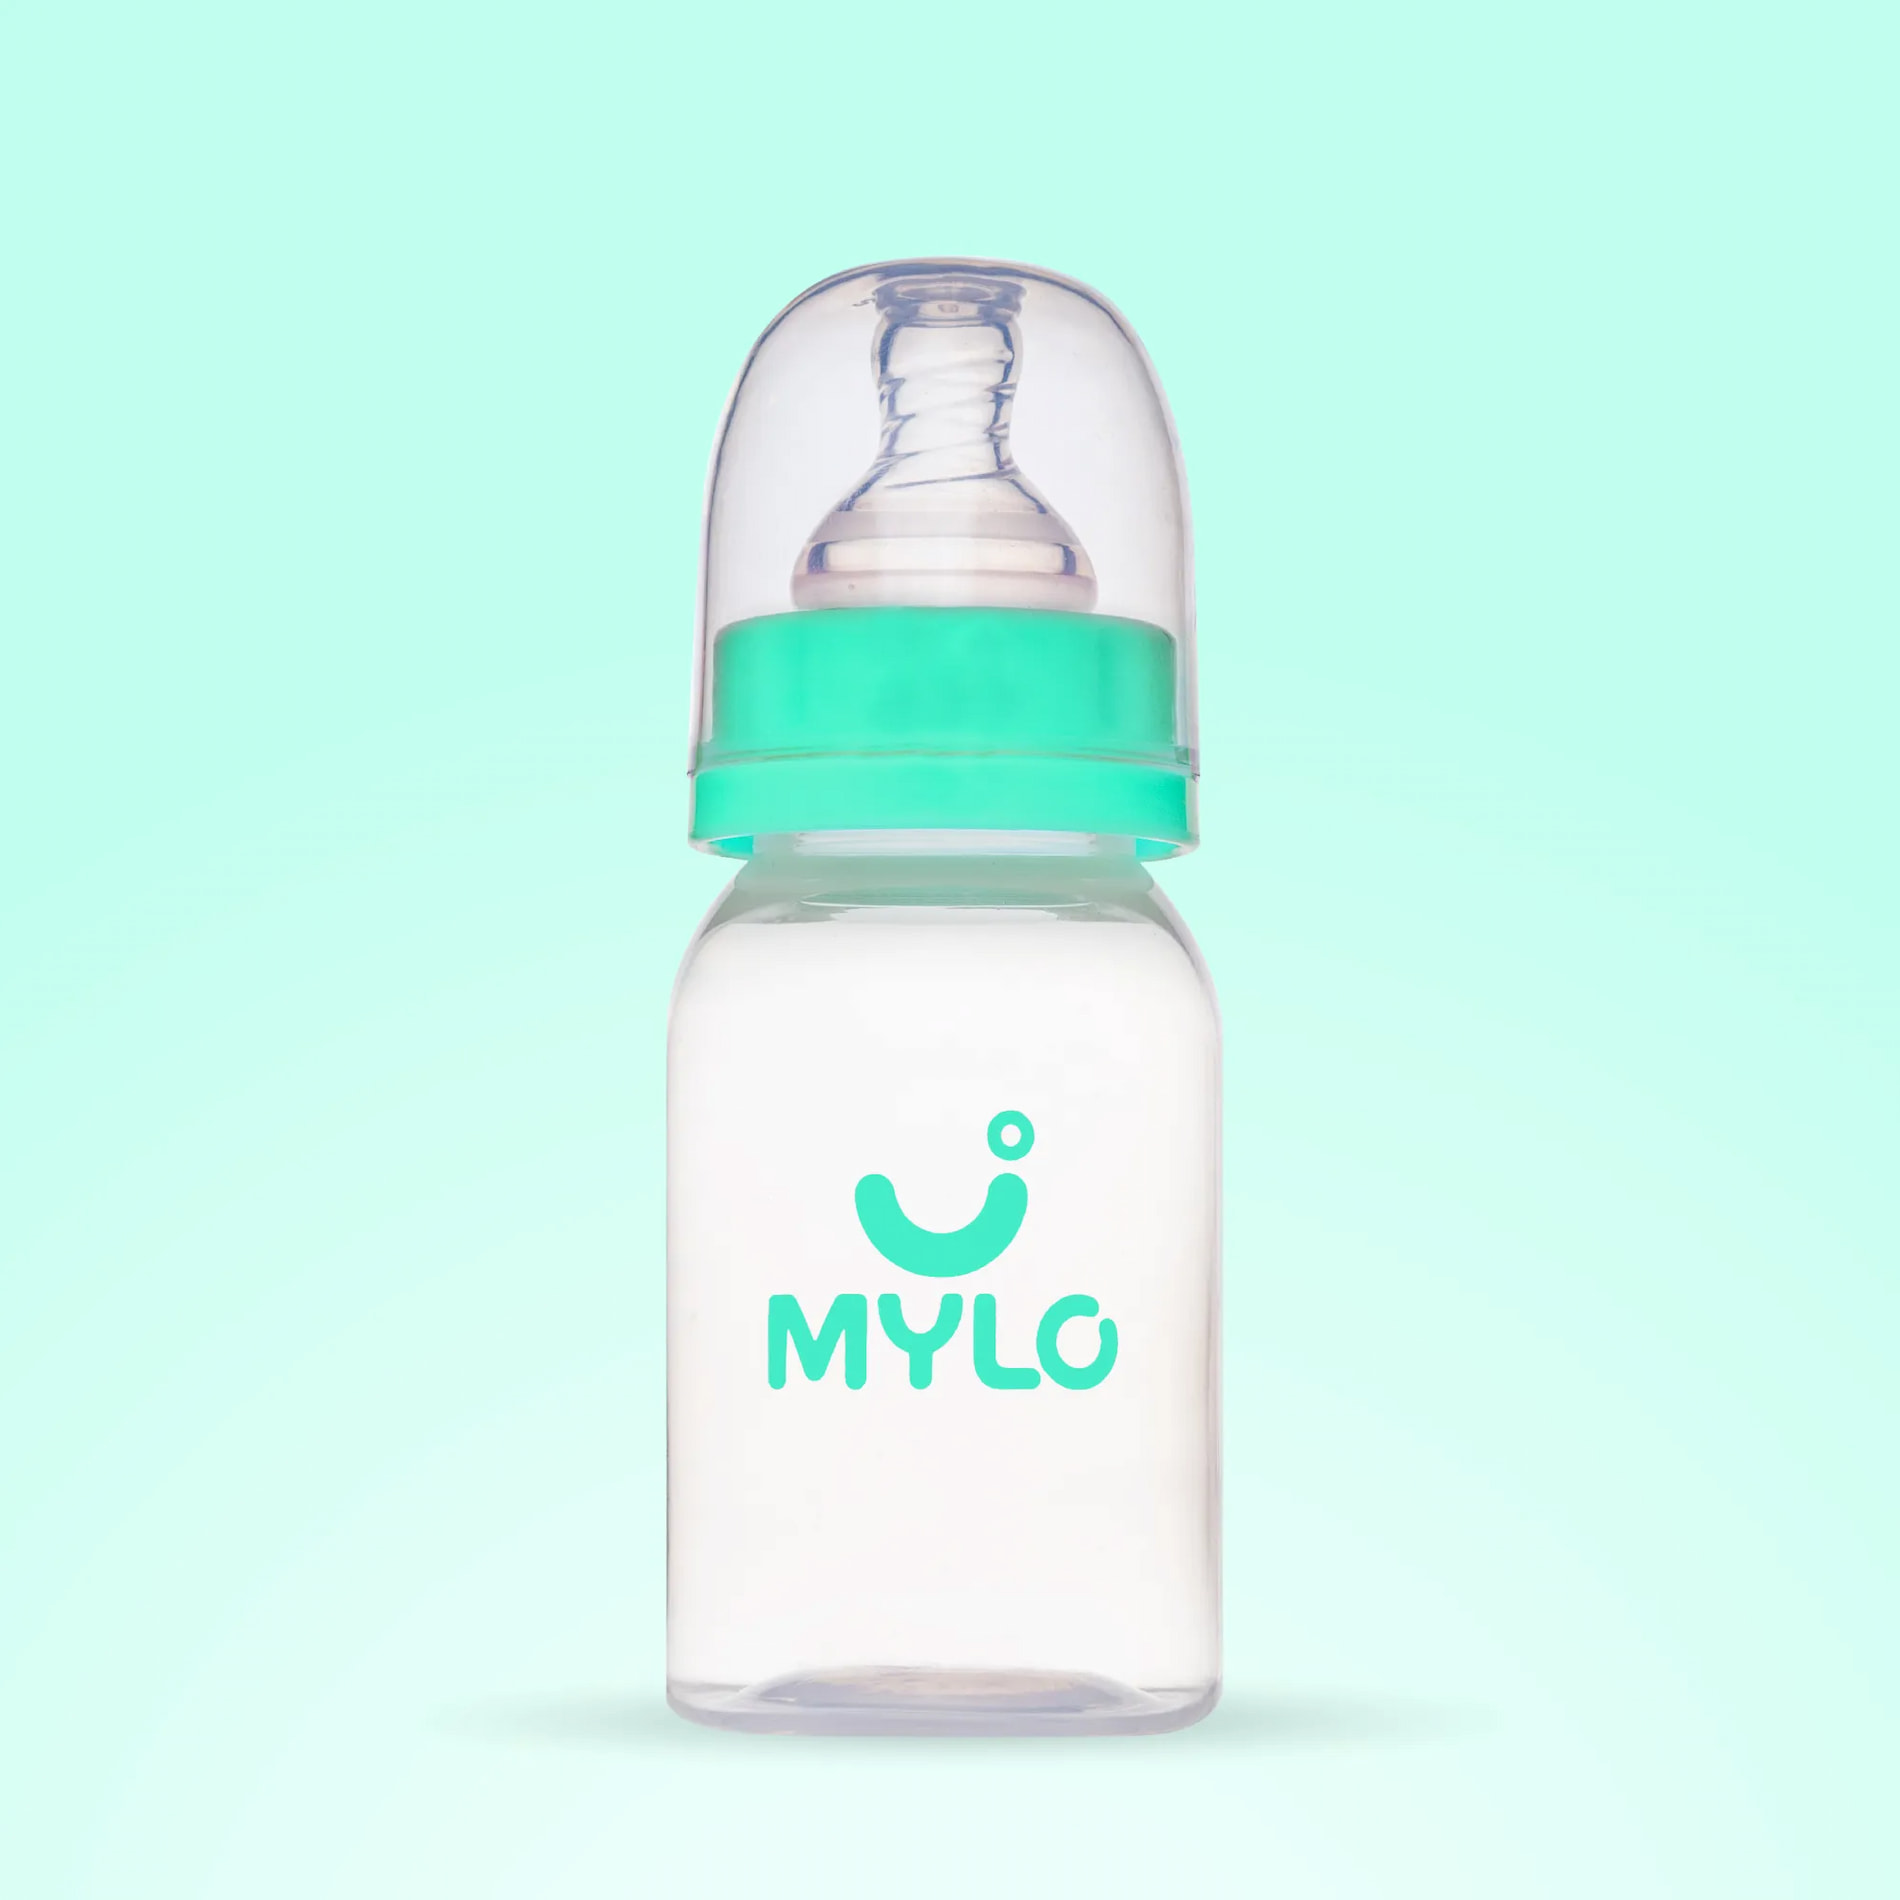 2-in-1 Baby Feeding Bottle | BPA Free with Anti-Colic Nipple & Spoon | Feels Natural Baby Bottle | Easy Flow Neck Design - Green 125ml